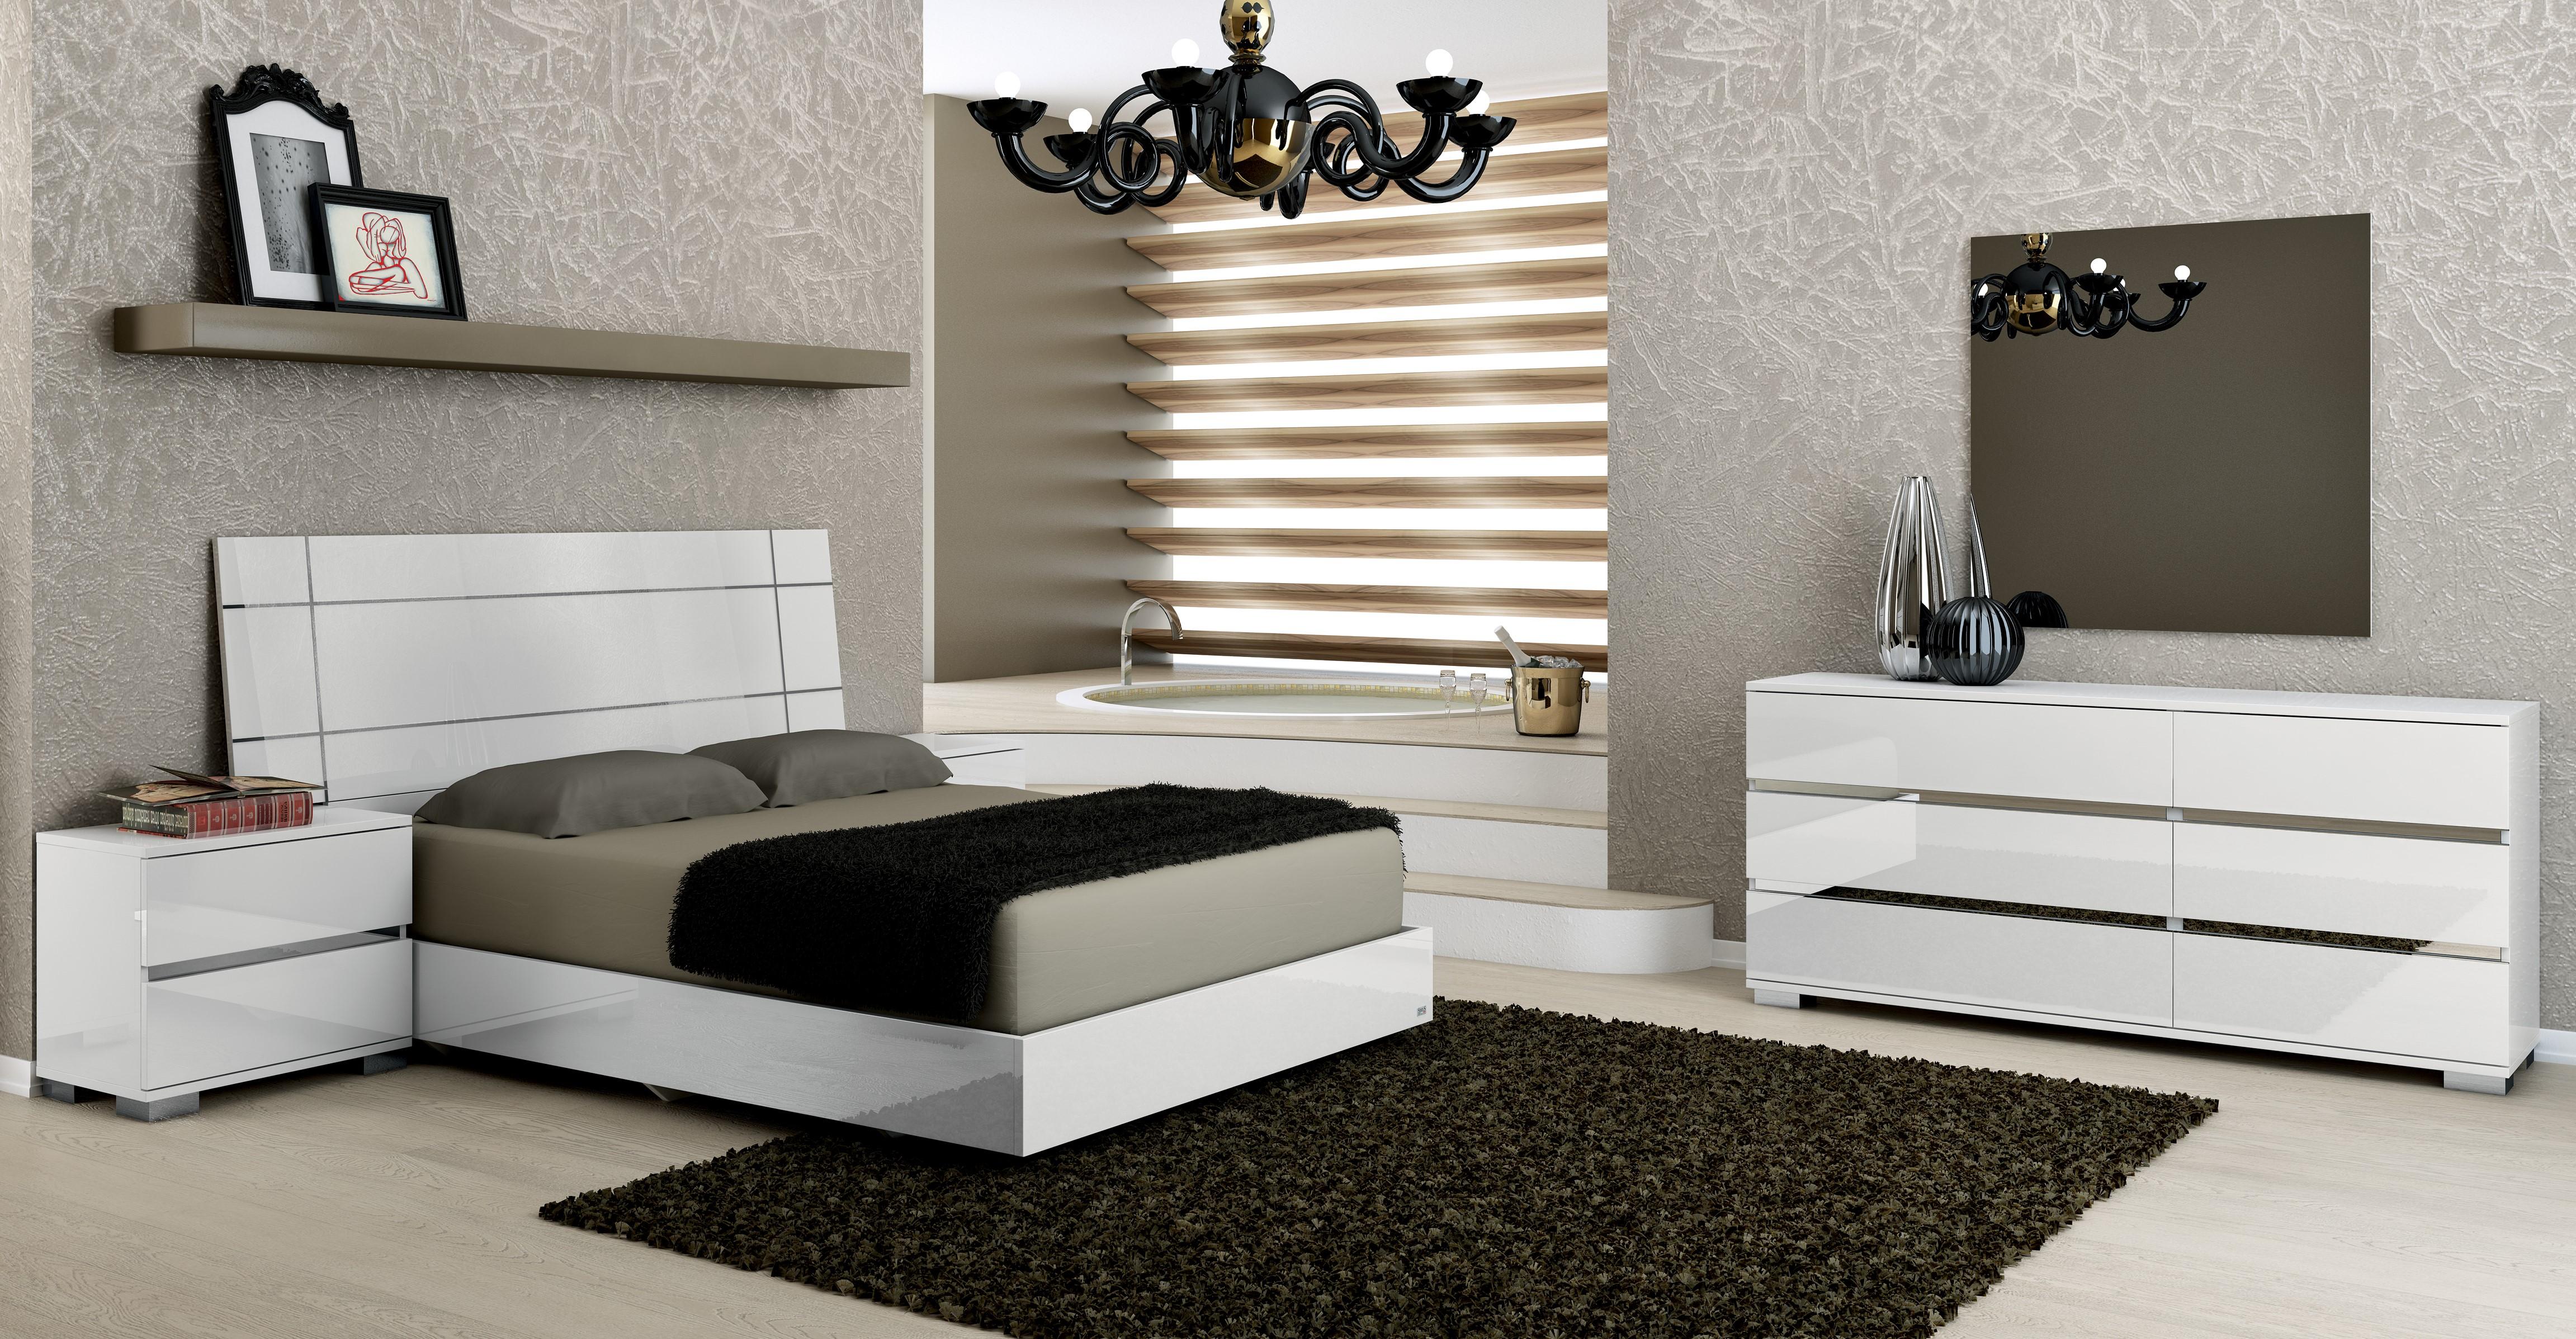 

    
At Home USA Dream White High Gloss Lacquer King Bedroom Set 5Pcs Made in Italy
